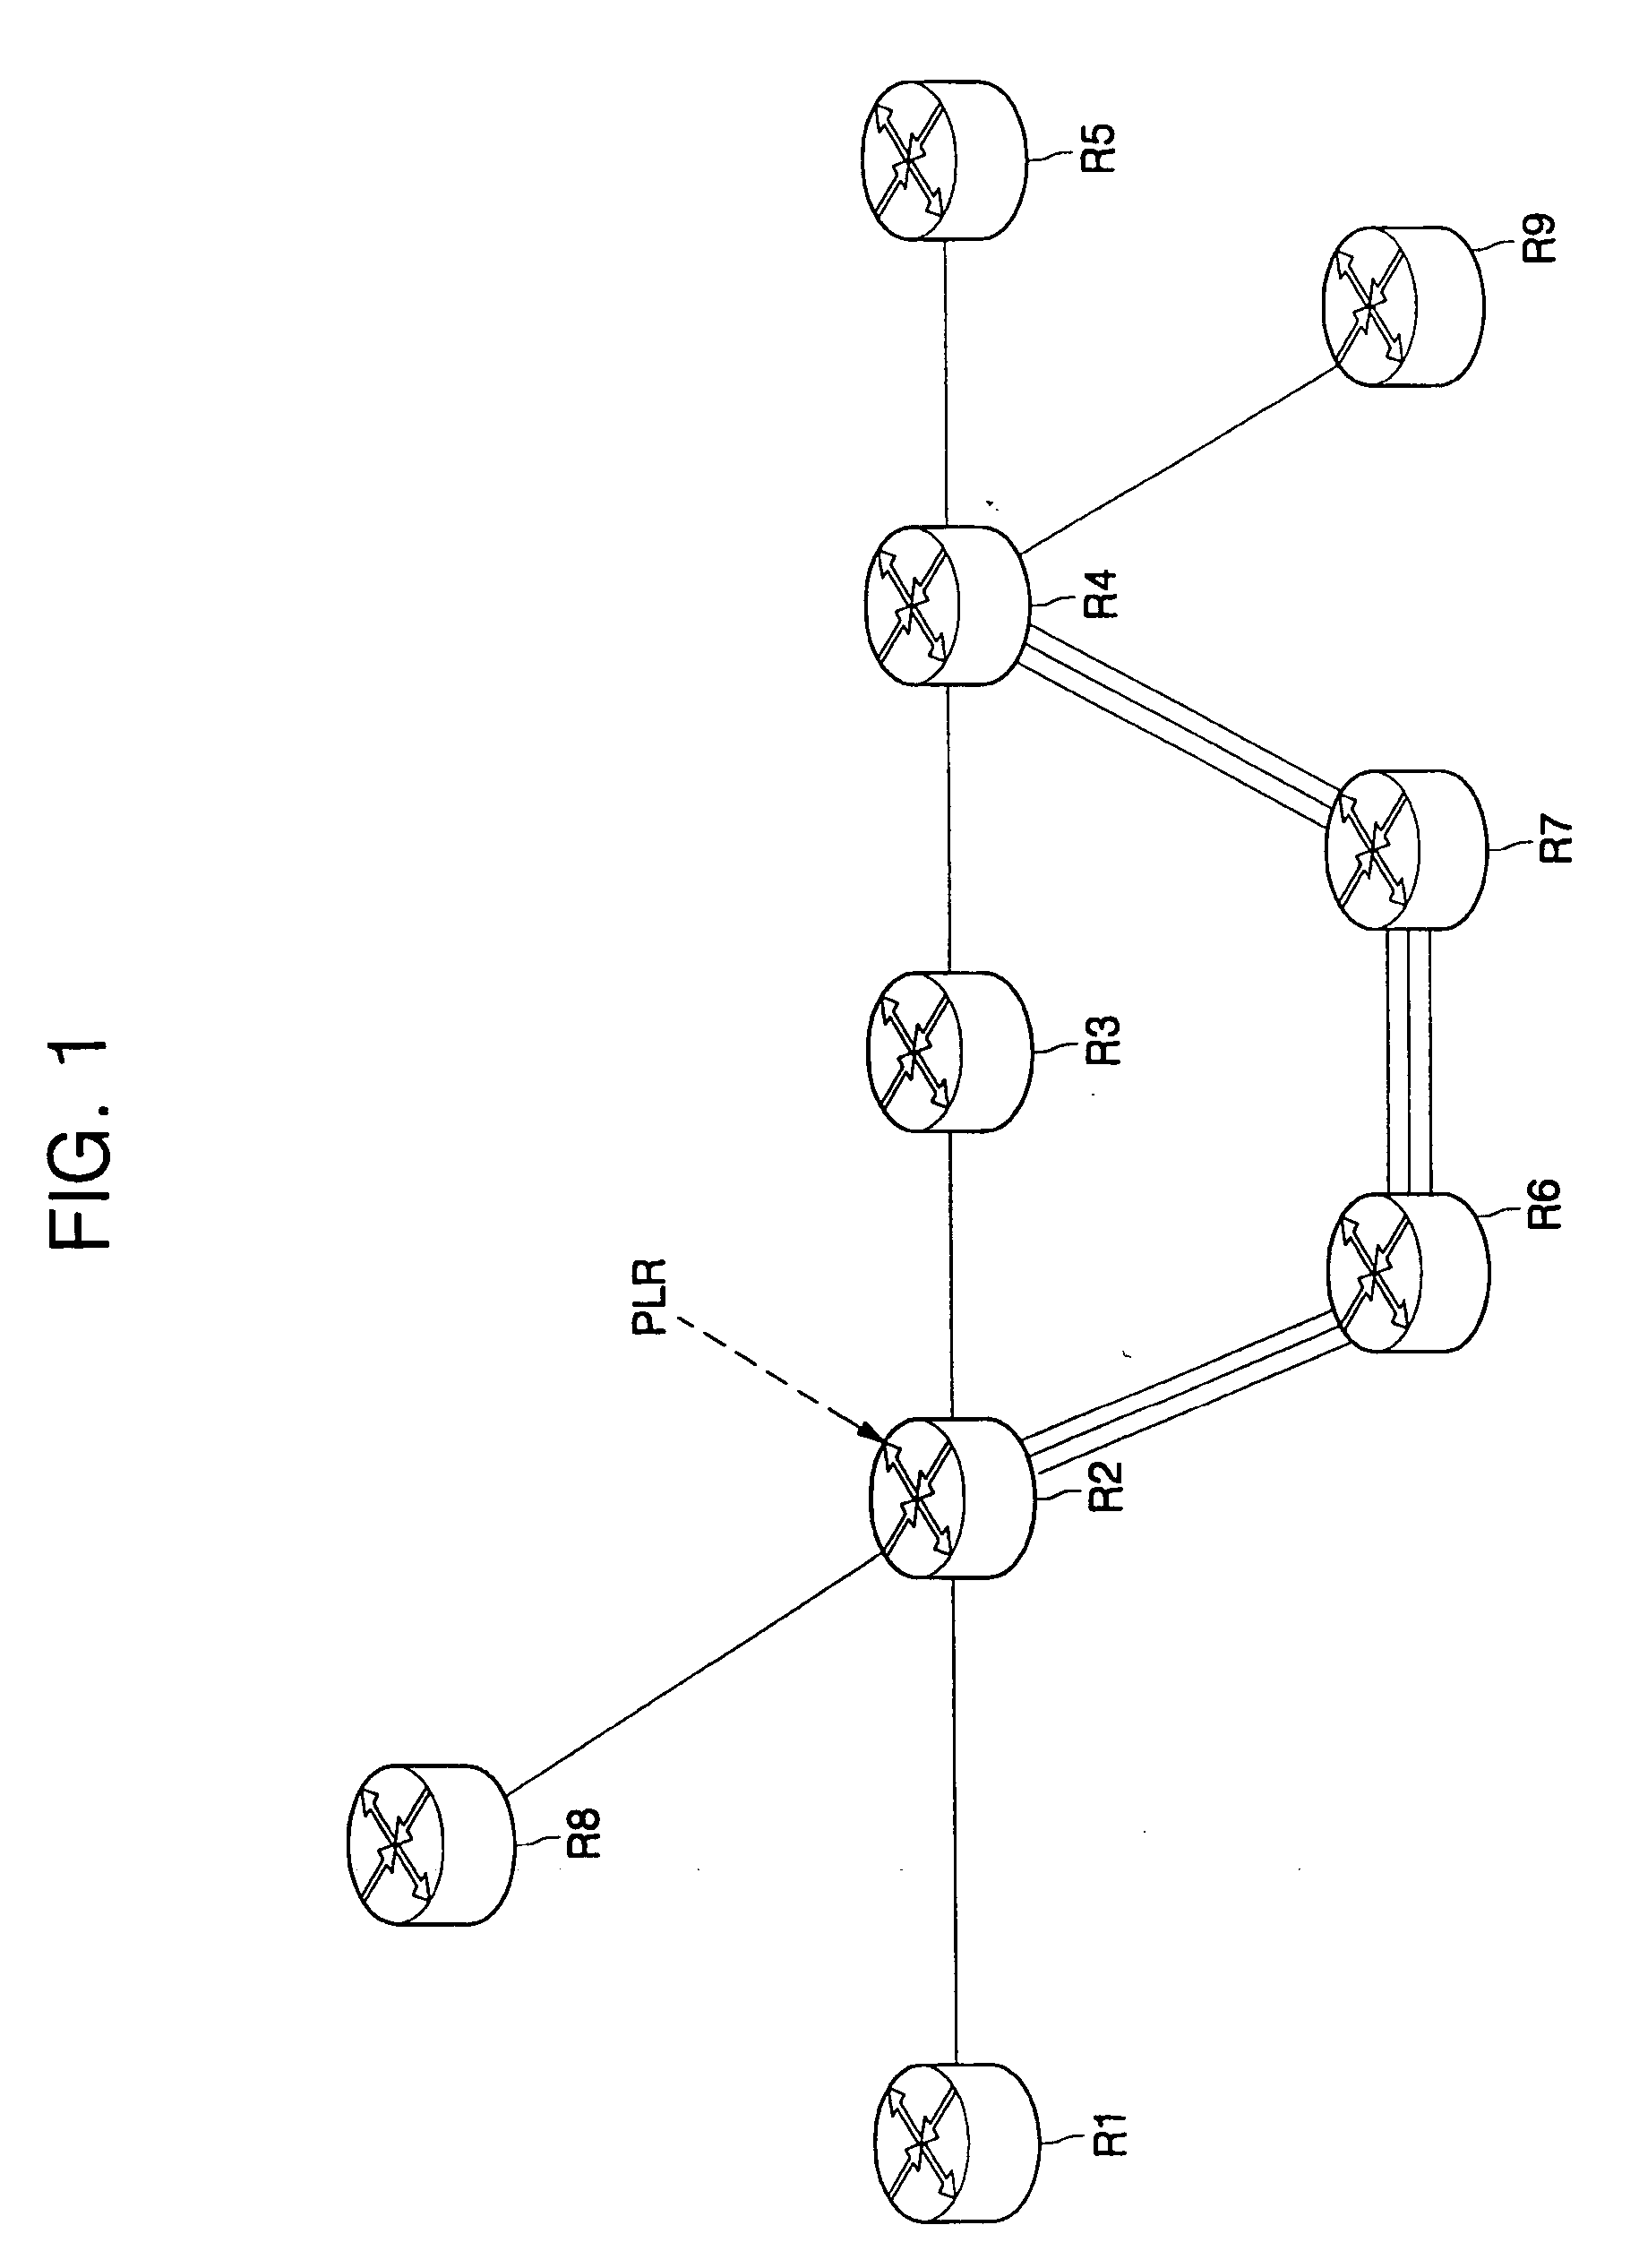 Fast rerouting apparatus and method for MPLS multicast